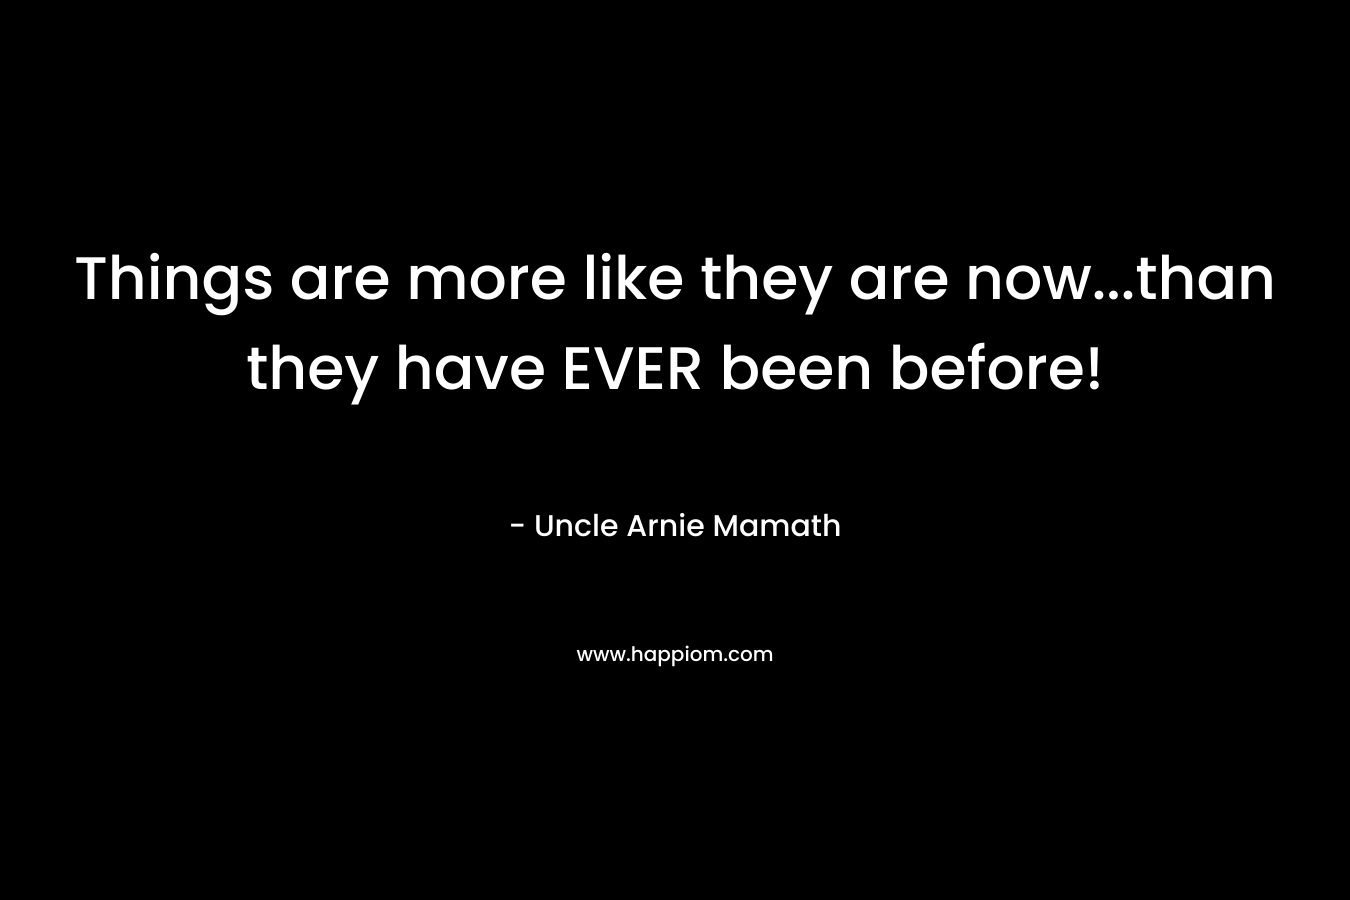 Things are more like they are now…than they have EVER been before! – Uncle Arnie Mamath